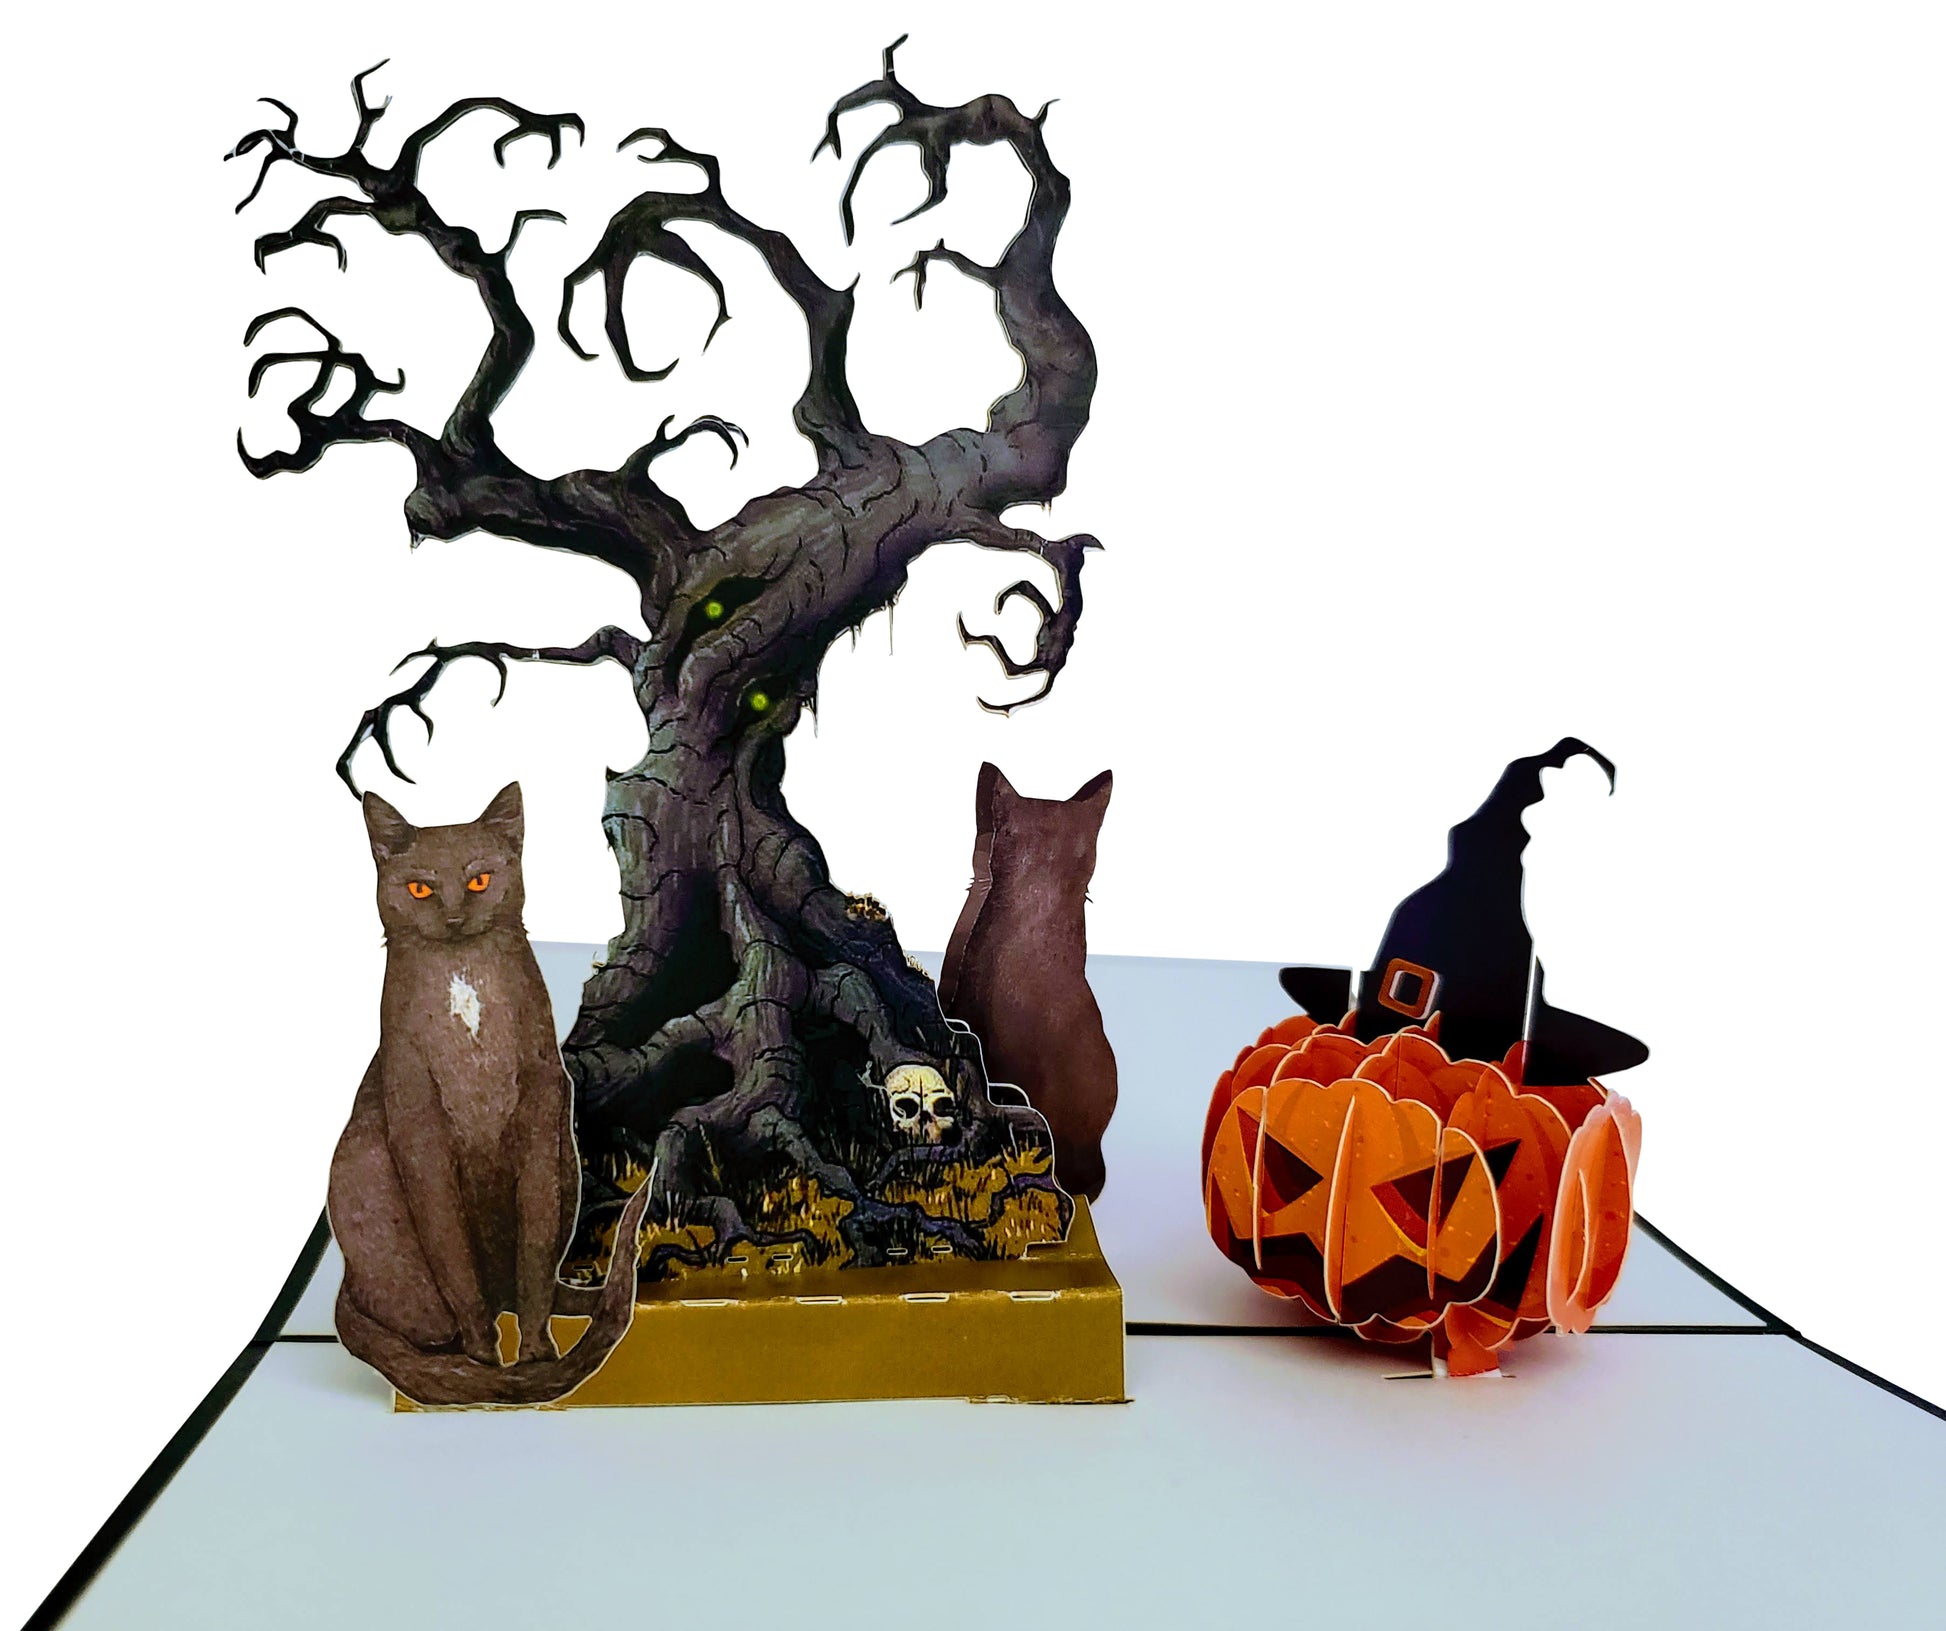 Black Cat and the Spooky Tree 3D Pop Up Greeting Card - 3d halloween card - best deal - black cat ha - iGifts And Cards